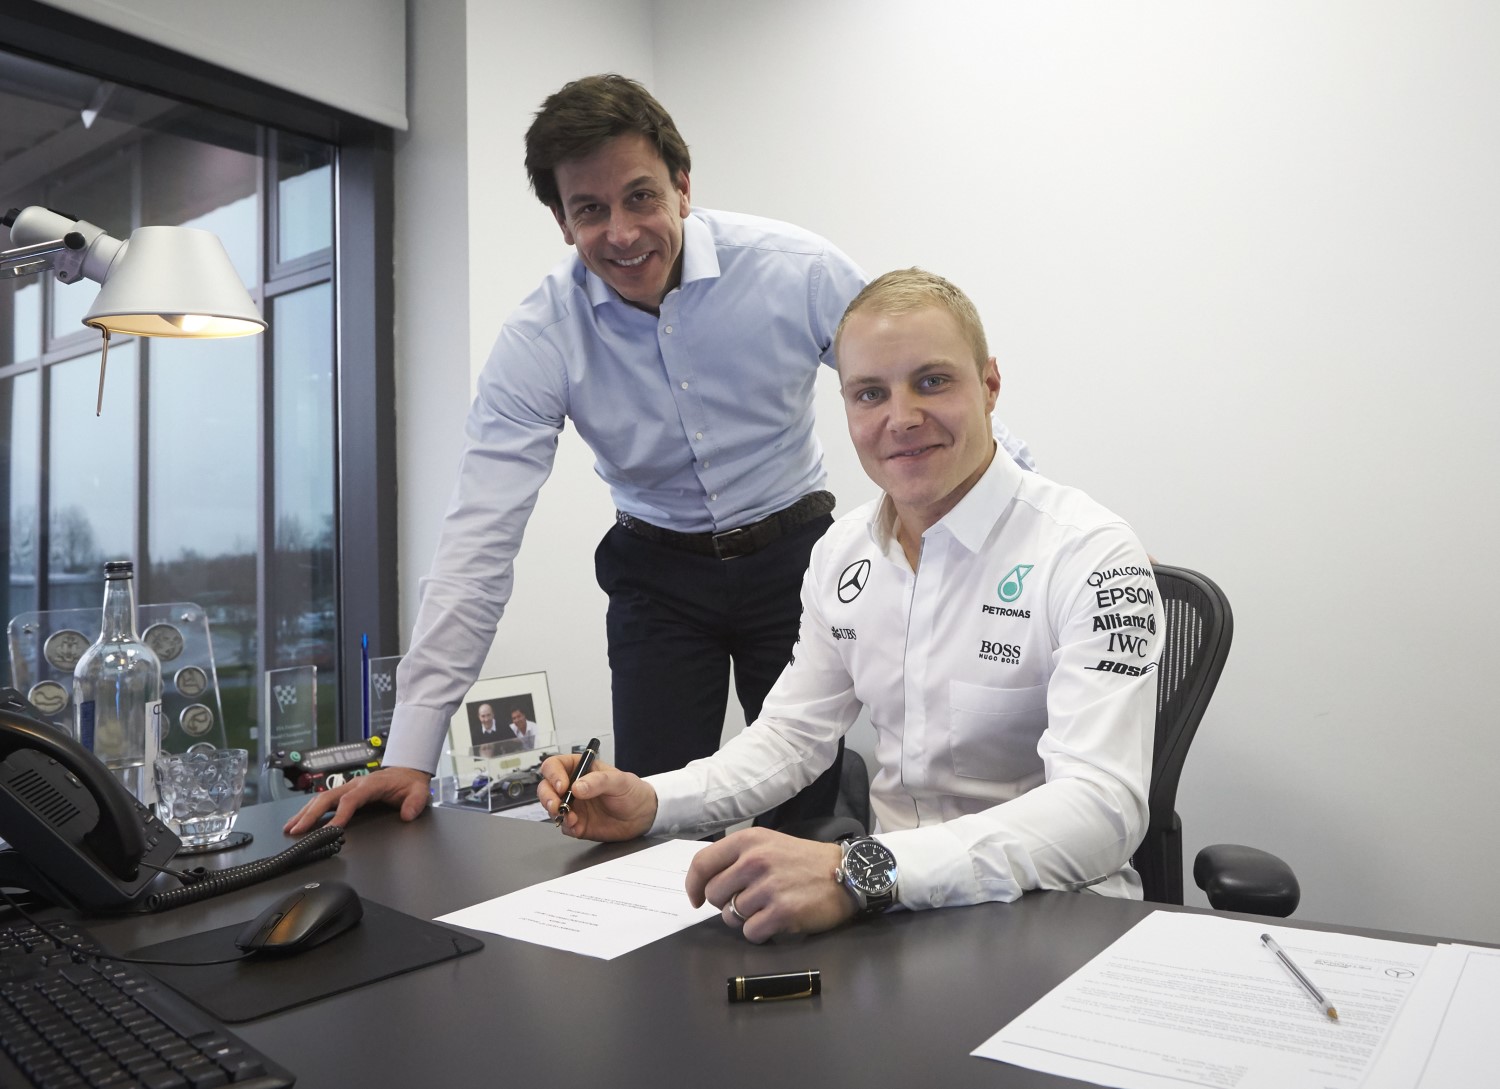 Will Wolff let Valtteri Bottas go back to Williams after one year?